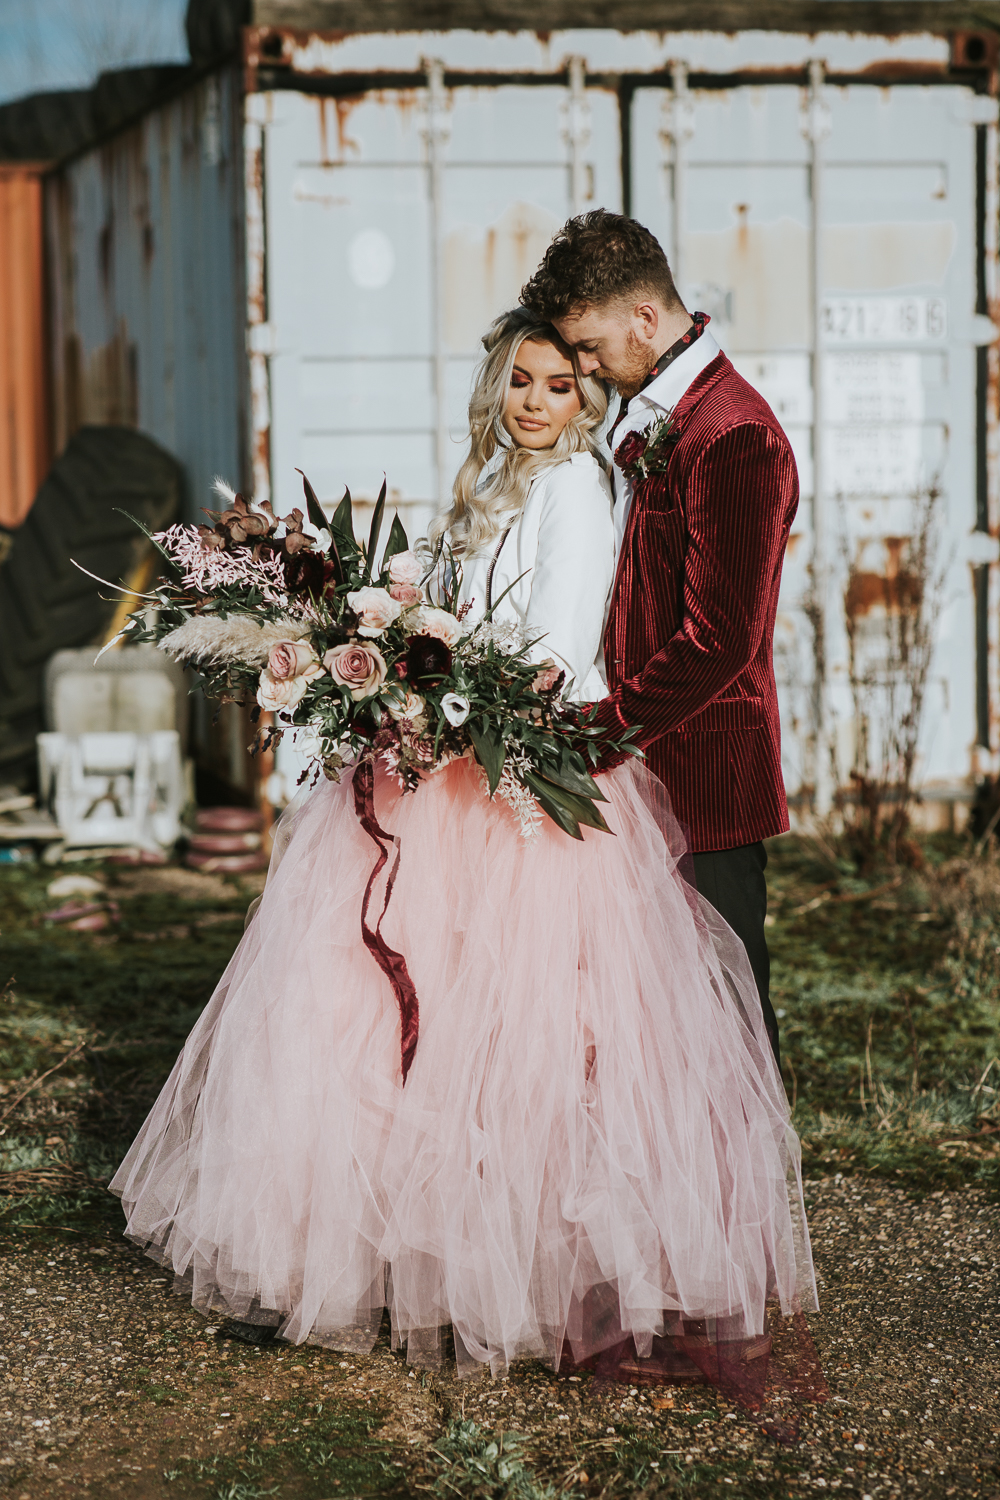 The bride was wearing a pink tutu, a white leather jacket and a half updo with waves